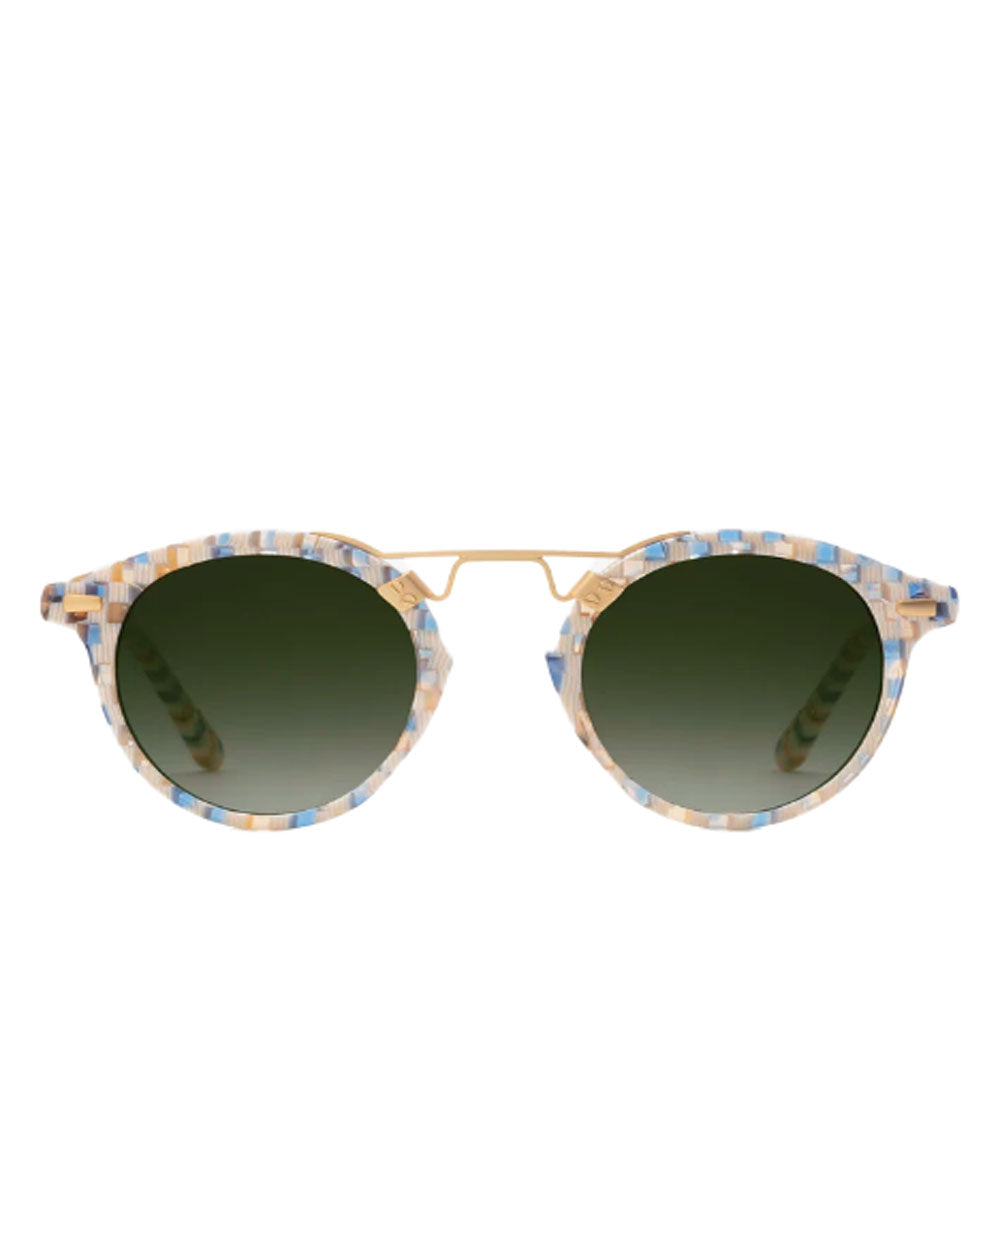 St. Louis Sunglasses in Pincheck 18K